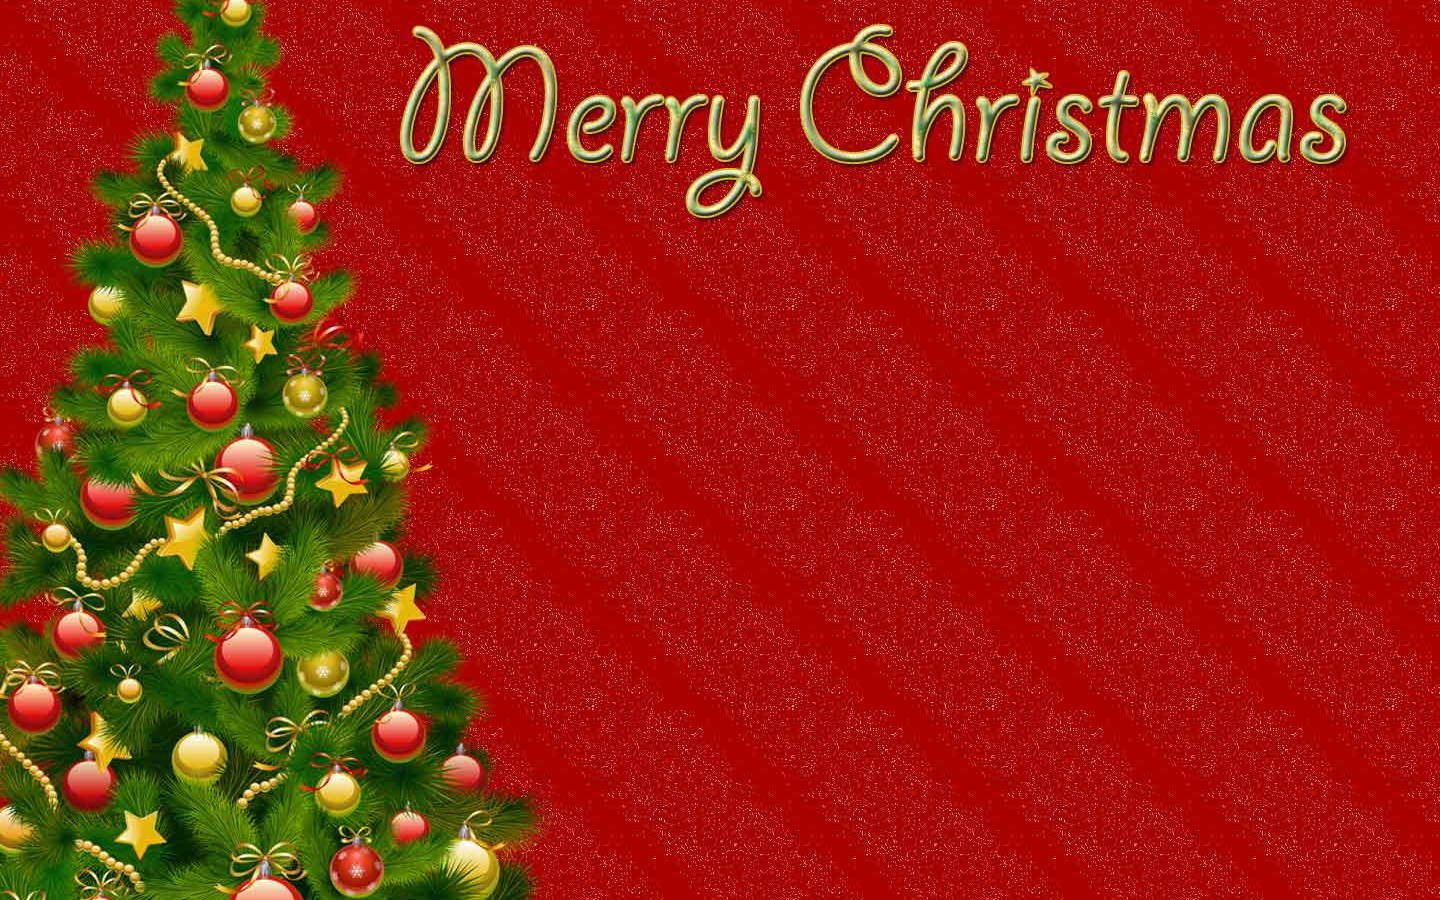 Holiday Greetings On Red Christmas Background Wallpaper